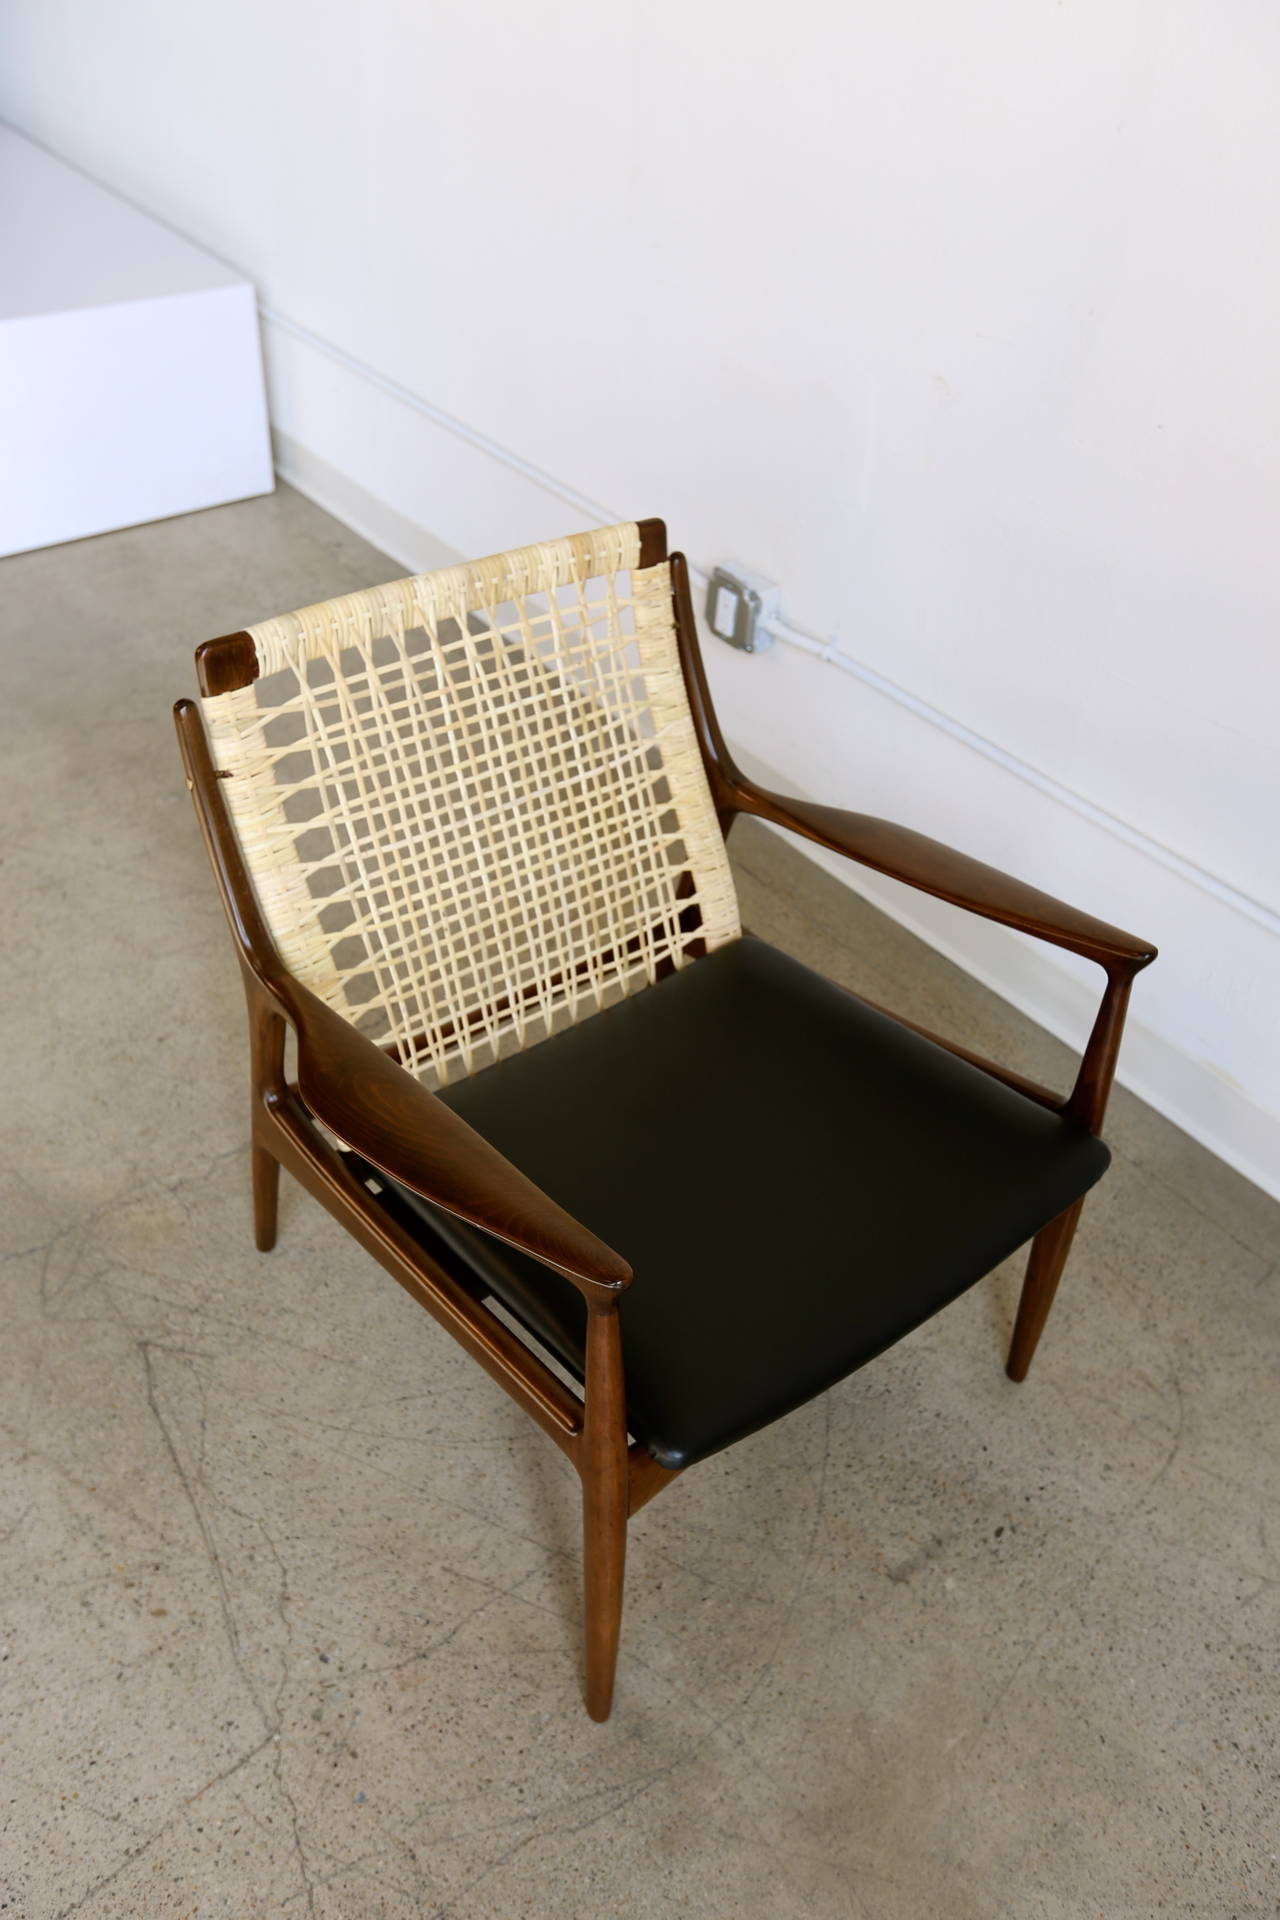 20th Century Caned Lounge Chair by Ib Kofod Larsen for Selig of Denmark